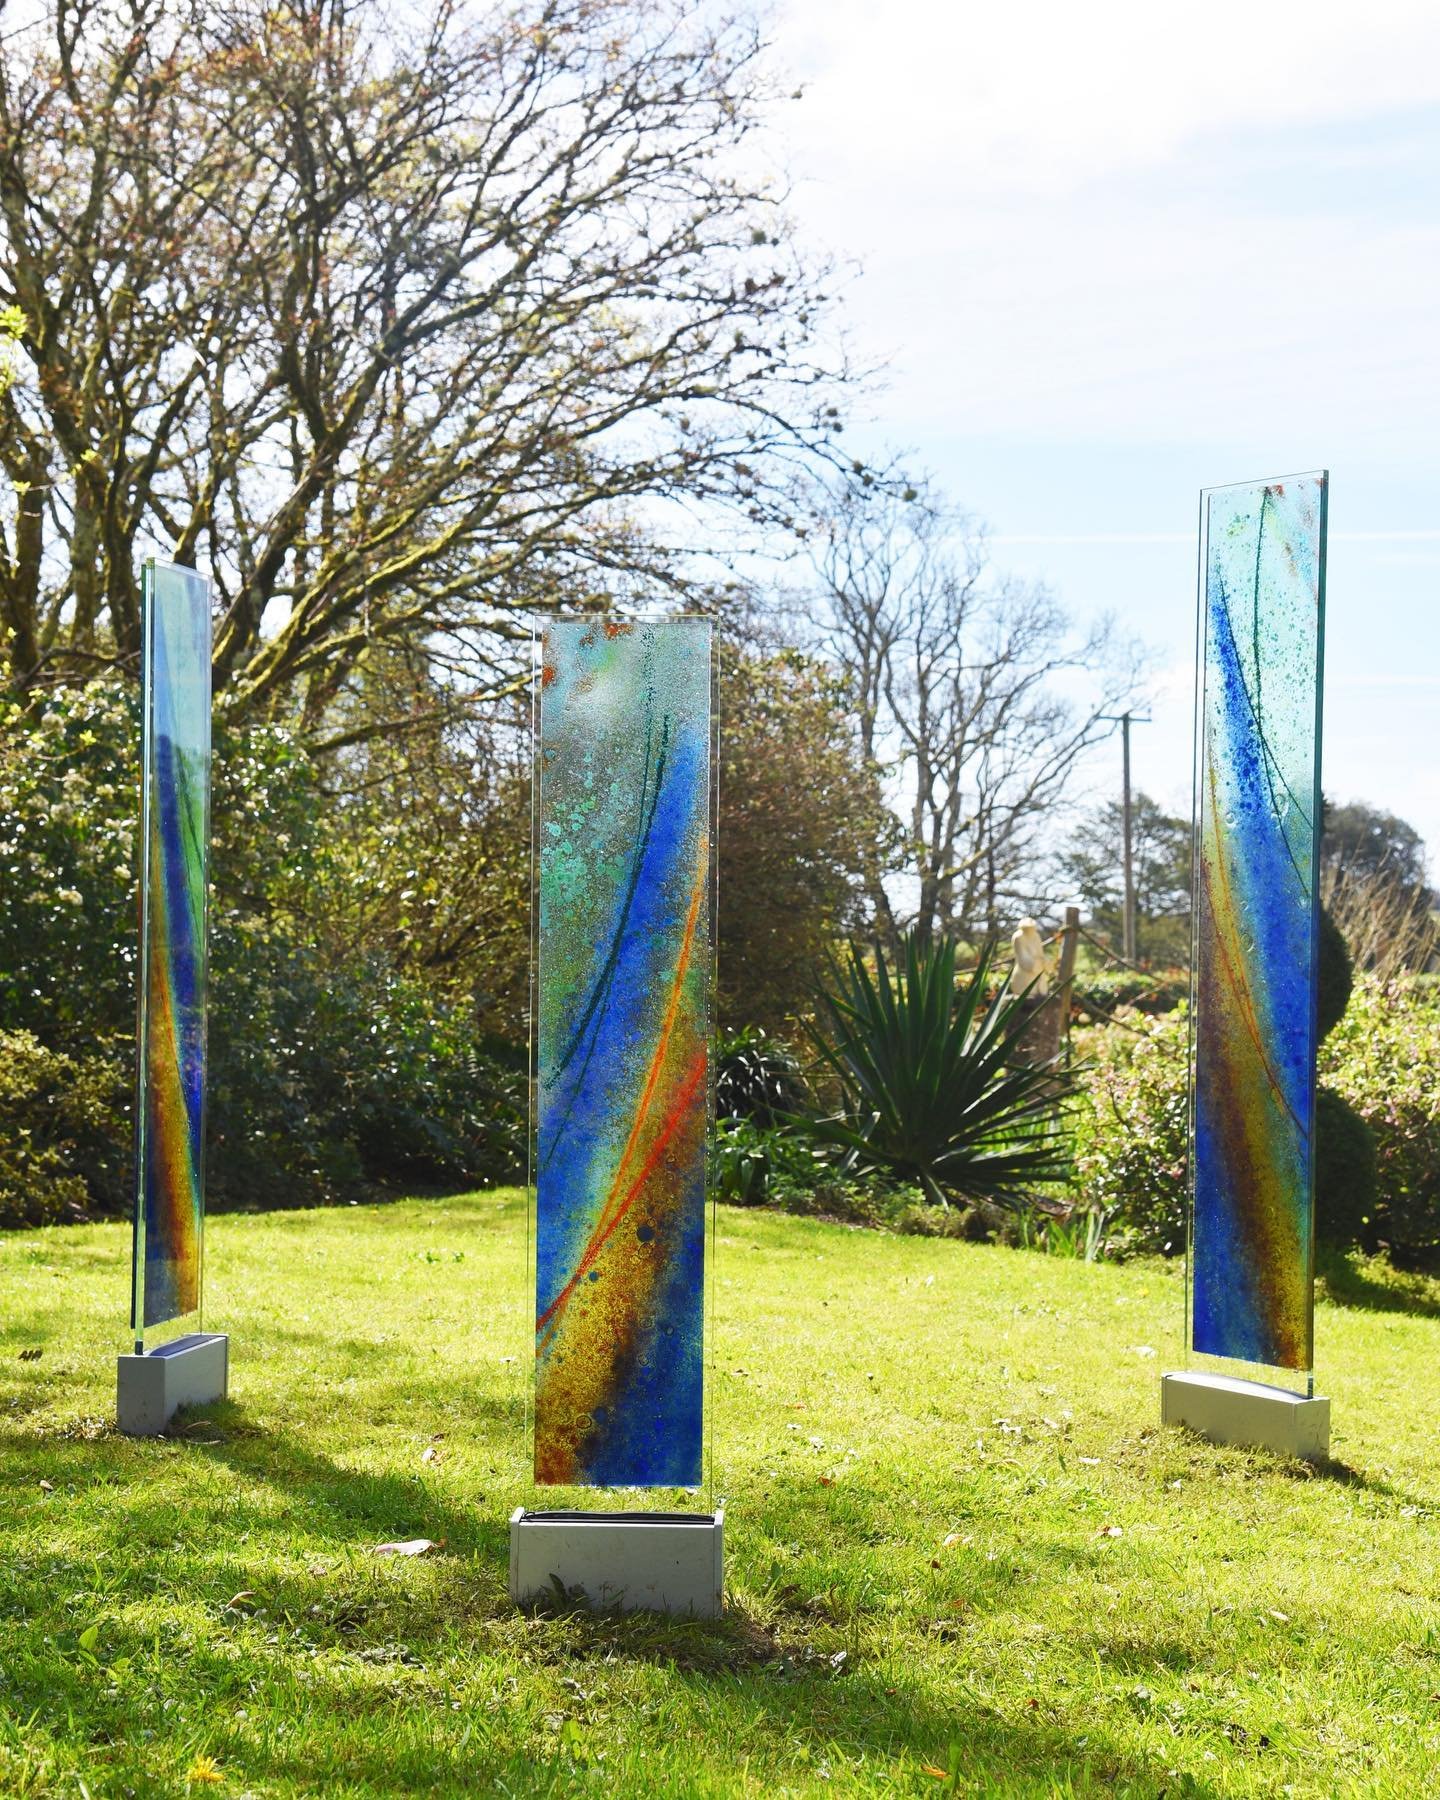 All set up ready for Delamore Arts 2024!

These are three of my pieces you can find in the gardens - abstract &lsquo;Totem&rsquo; panels available as a set of three or individually, they range from 915mm to 1315mm in height.

The outdoor sculpture an